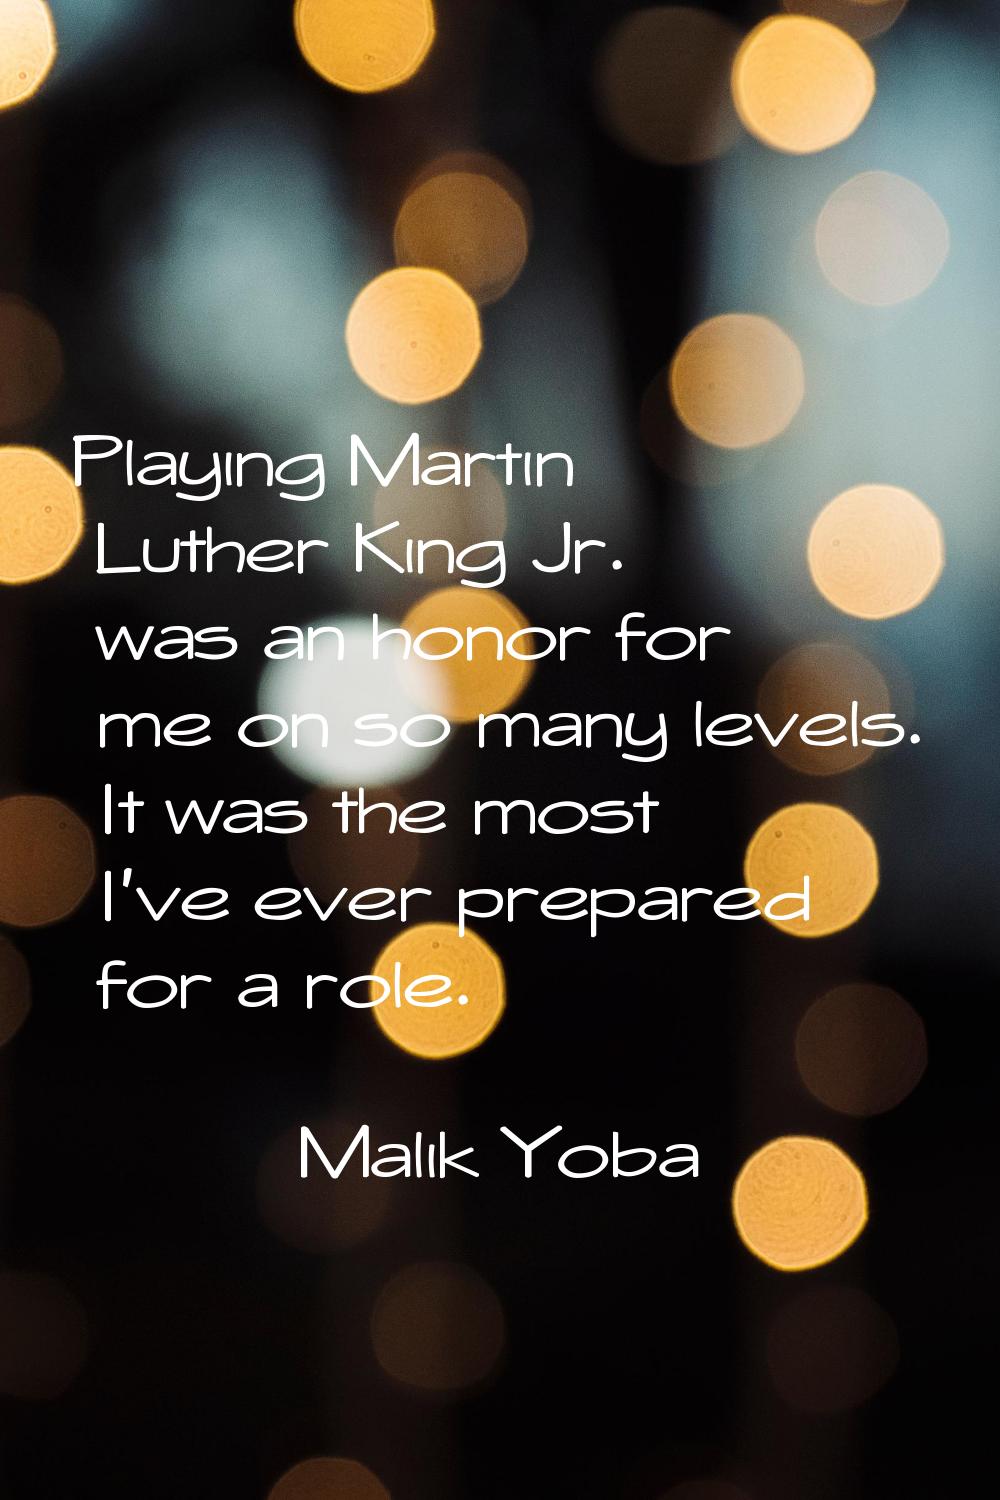 Playing Martin Luther King Jr. was an honor for me on so many levels. It was the most I've ever pre